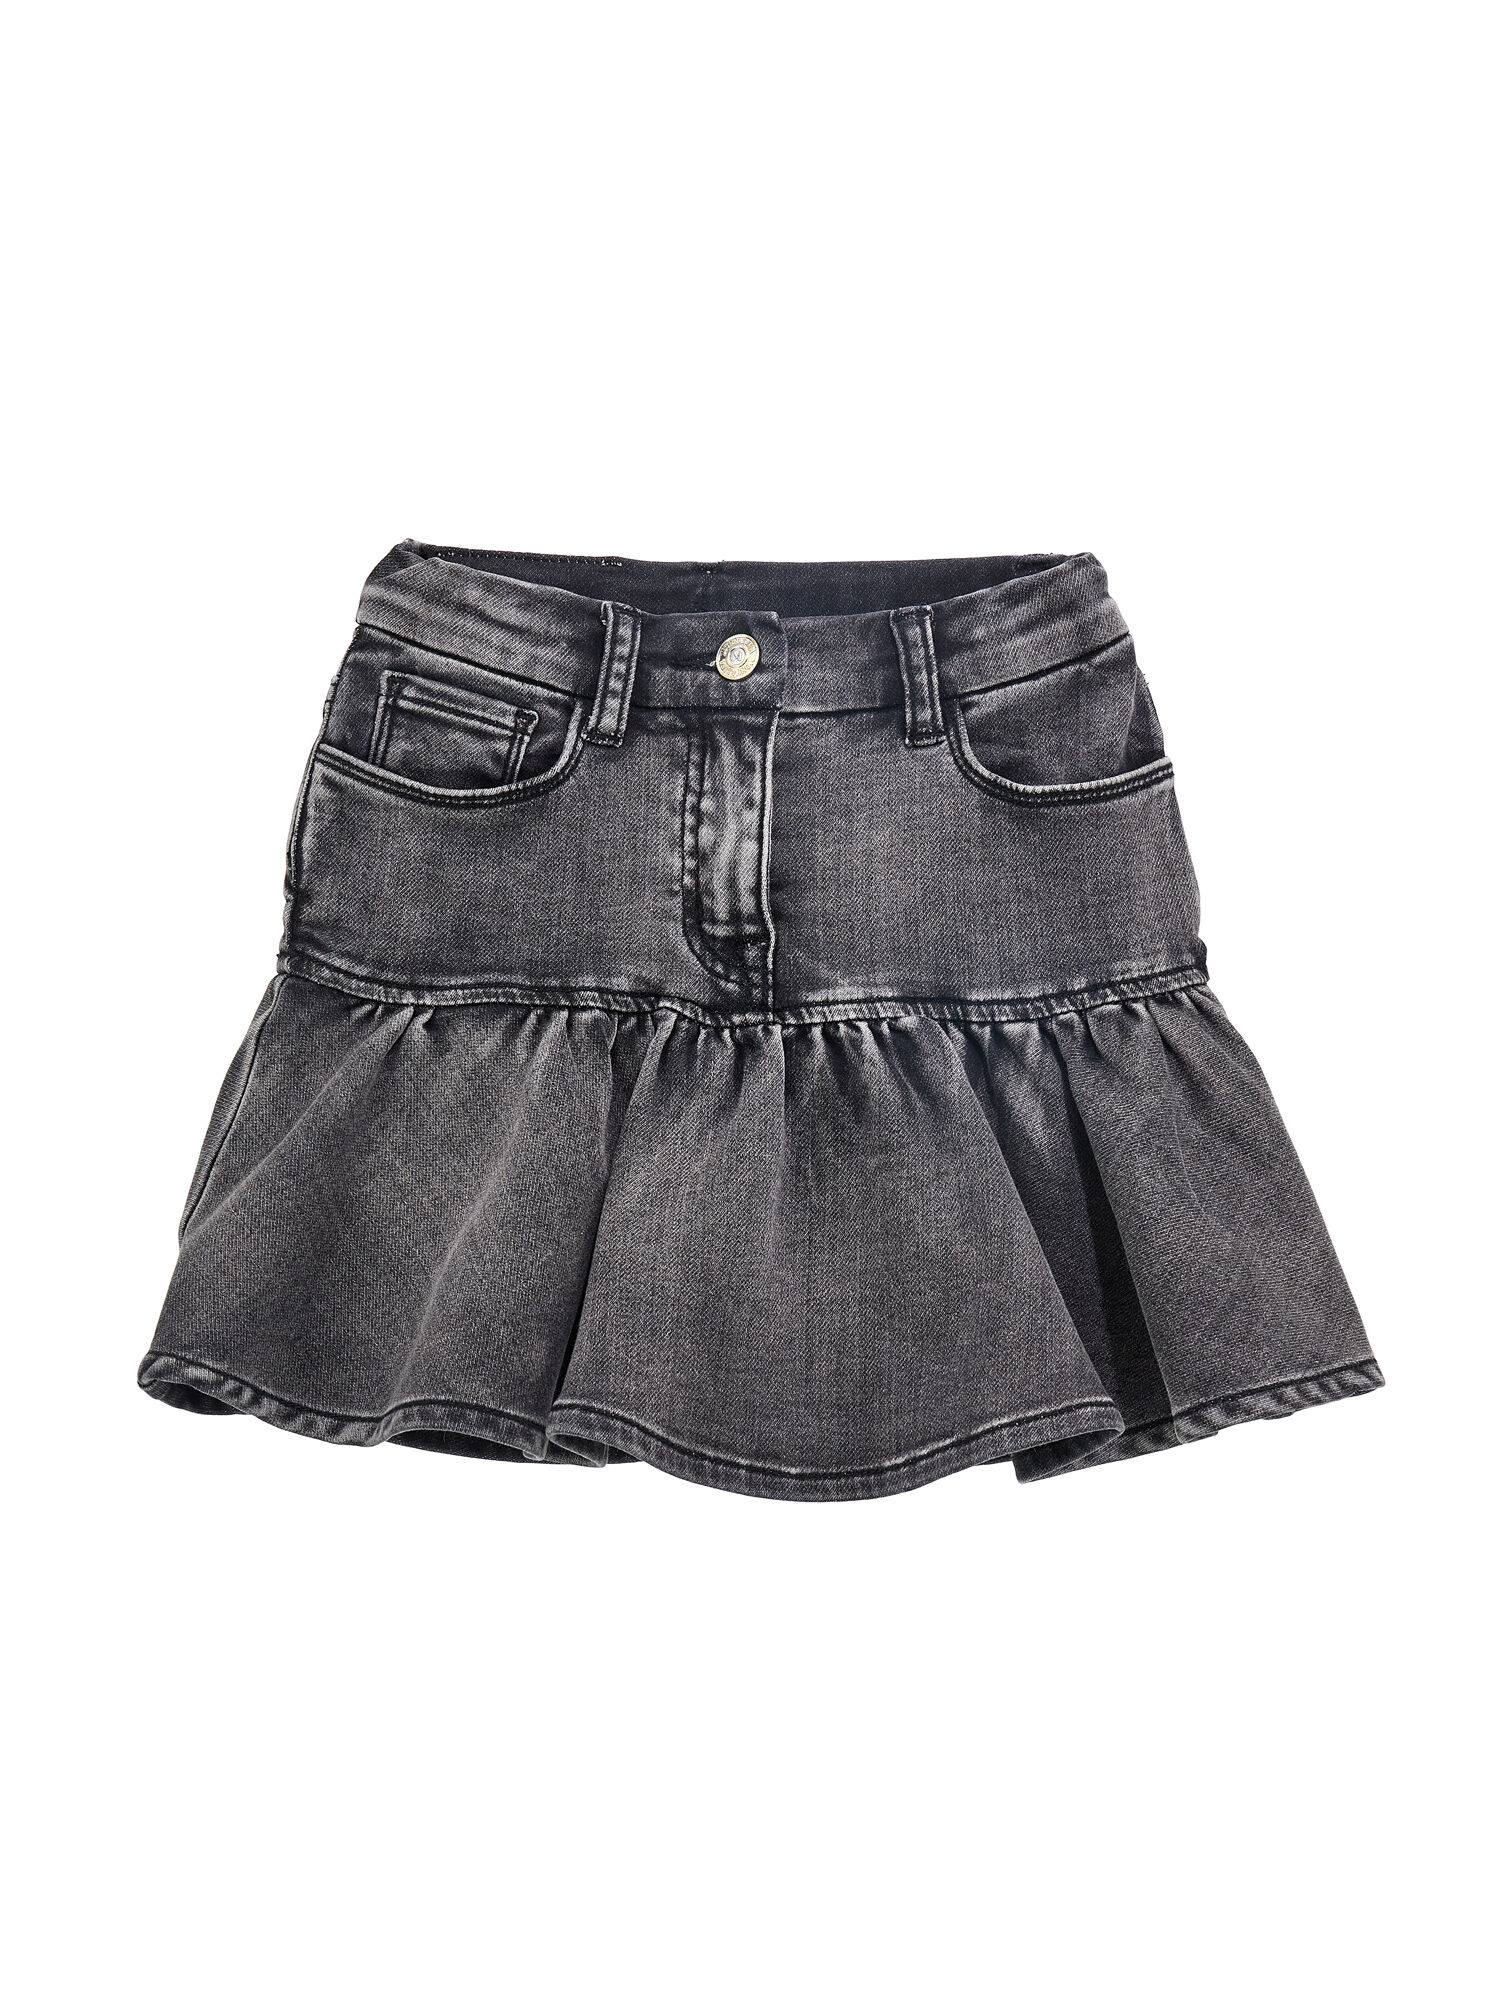 Roadster girls' skirts, compare prices and buy online